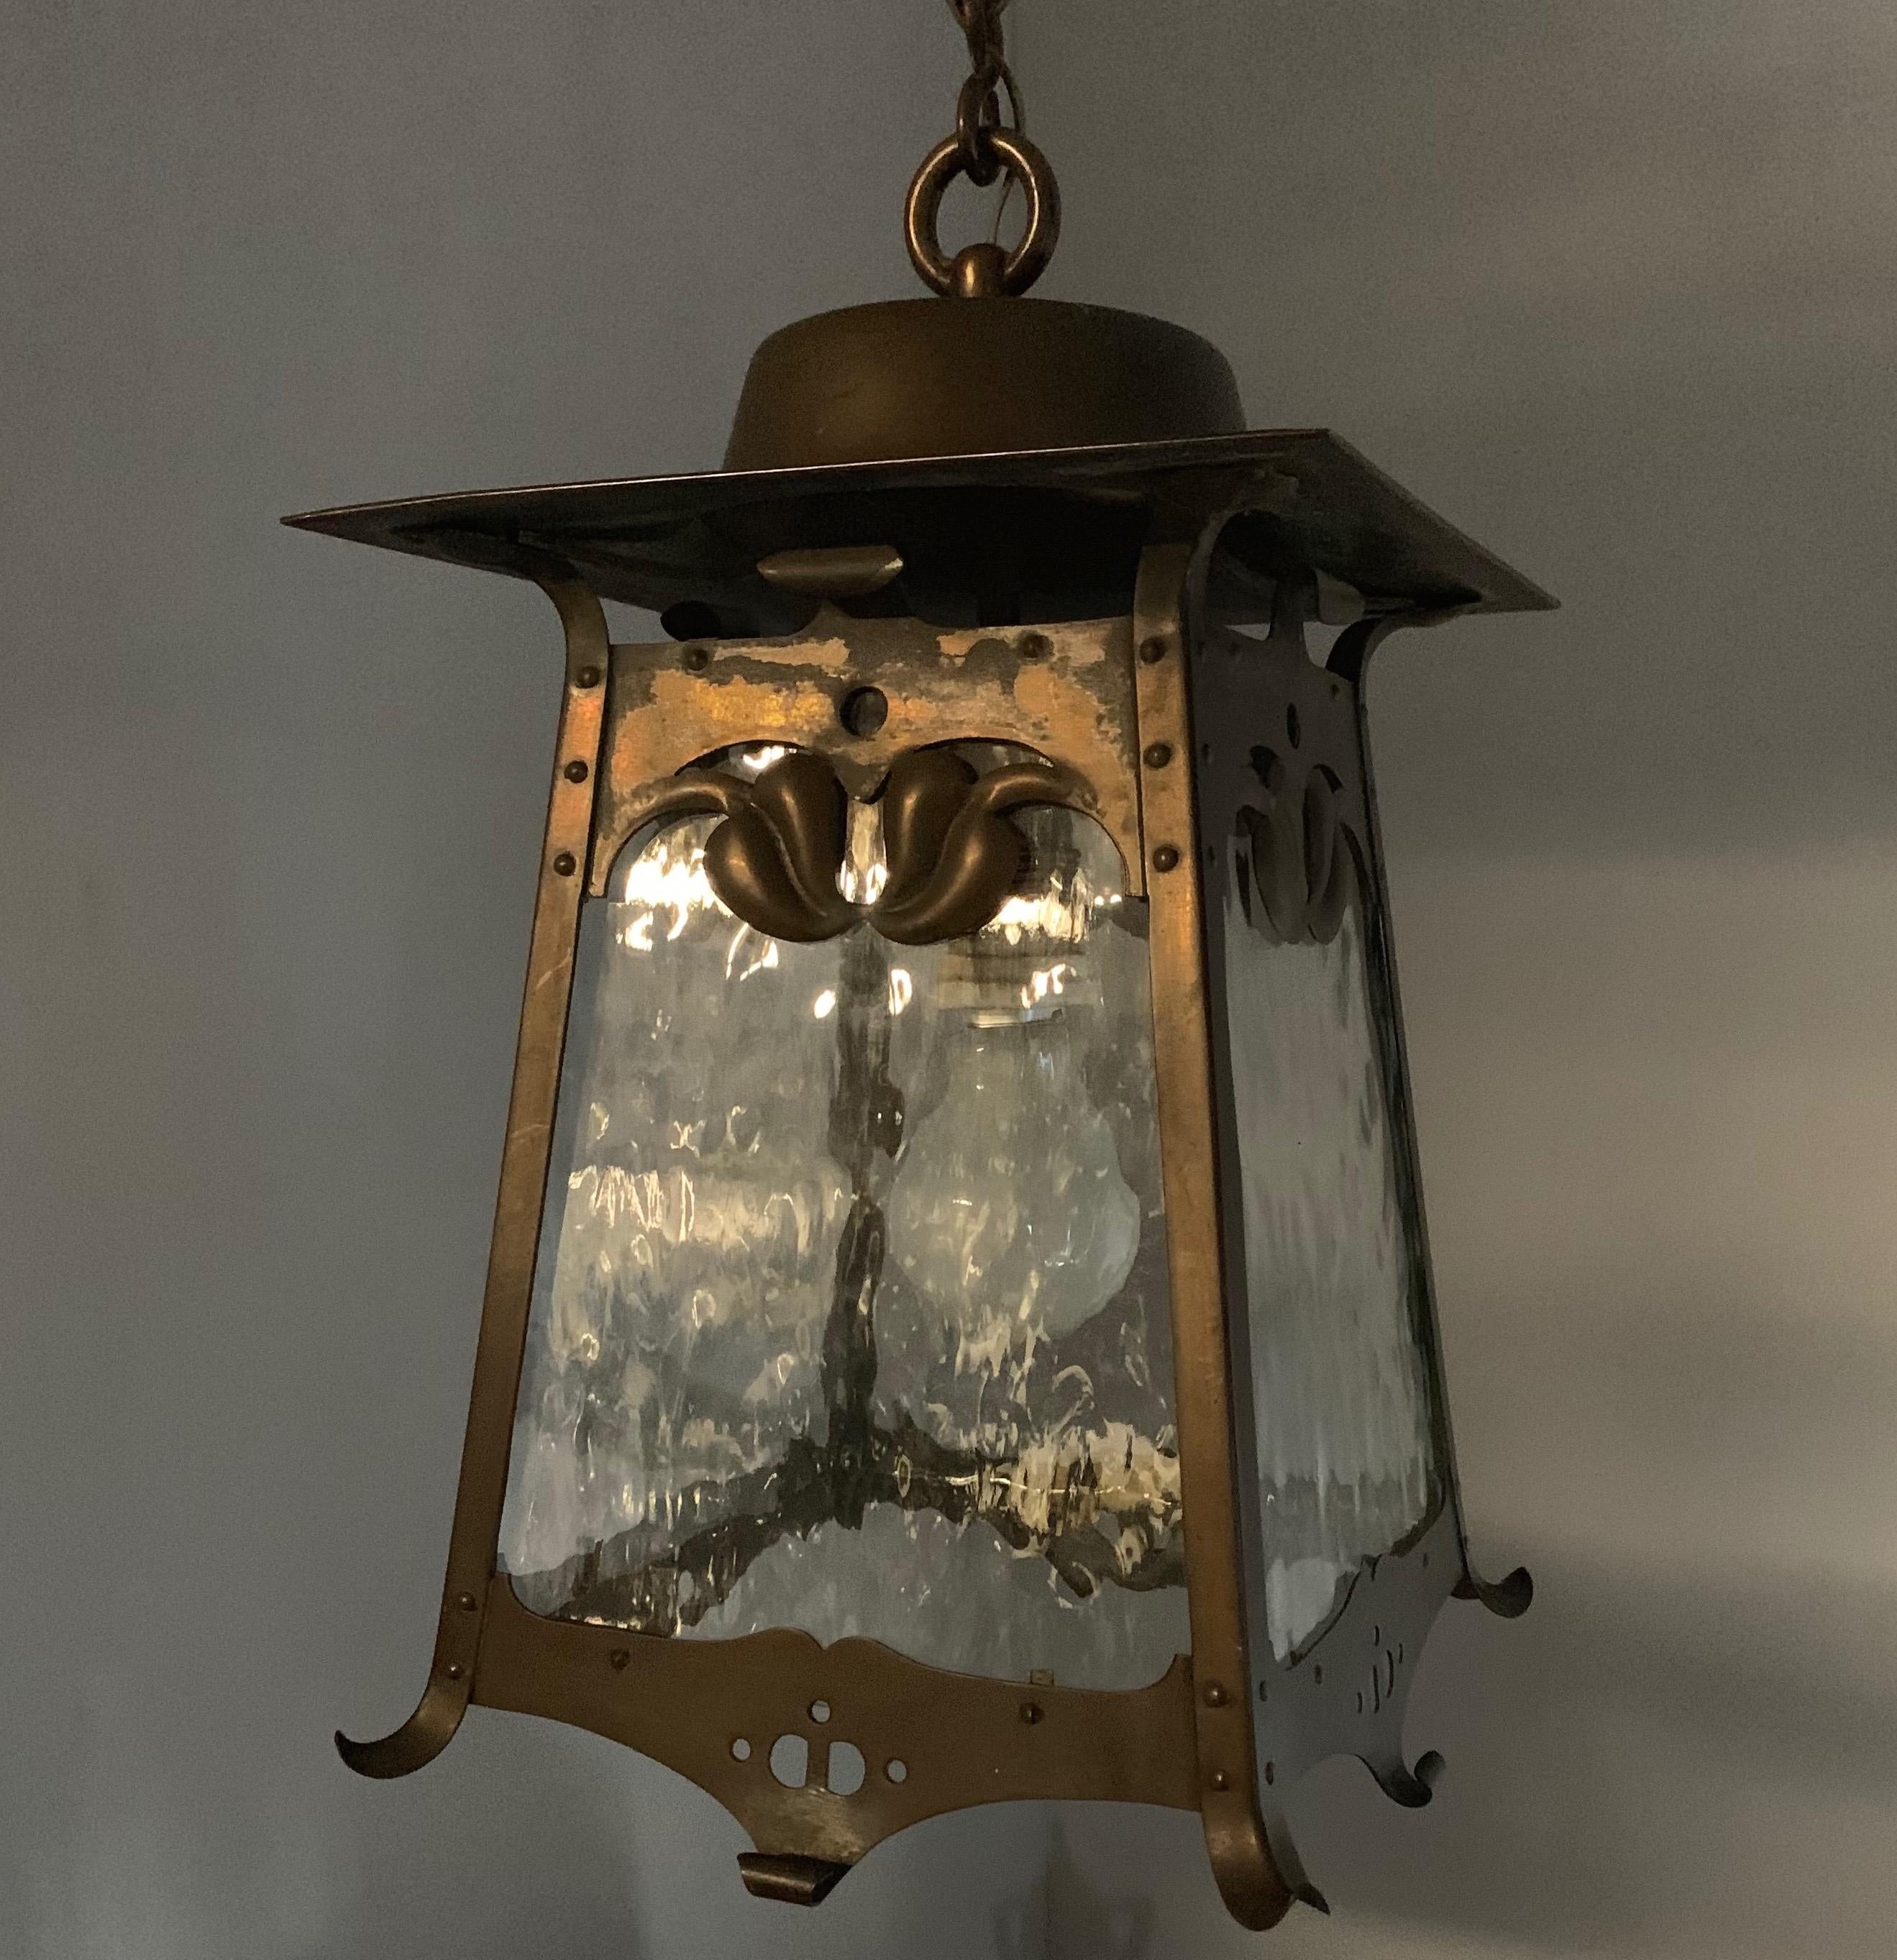 Rare and all handcrafted light fixture of perfect design and proportions.

If you are looking for an early 1900s, stylish and top quality crafted light to grace your entry hall, landing or bedroom then look no further, because if ever there was a